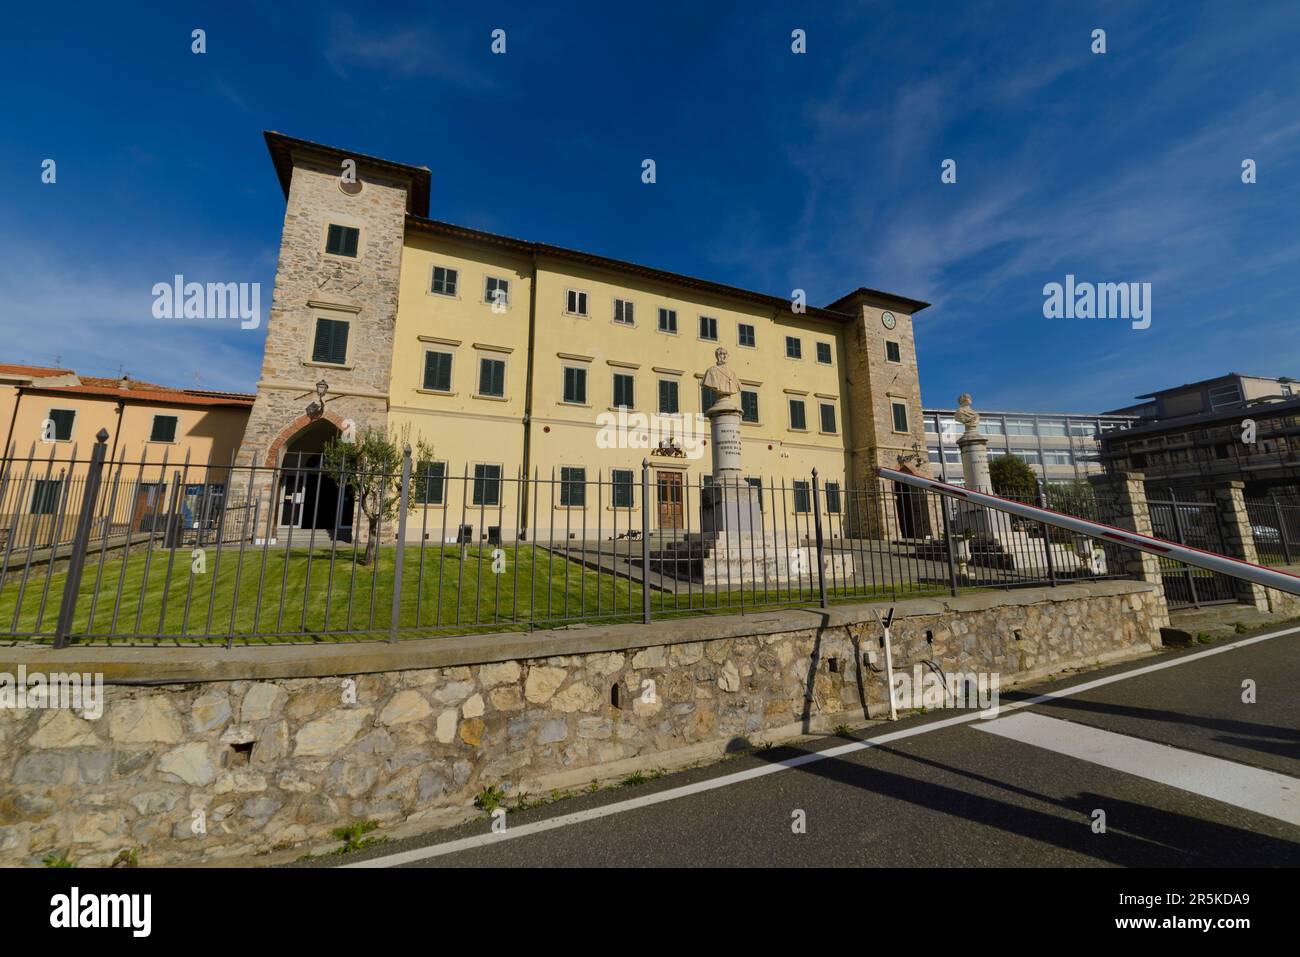 Palazzo De Larderel, Geothermal Museum of Larderello, Tuscany, Italy.  Green industry that uses the earth's heat to produce electricity. Stock Photo